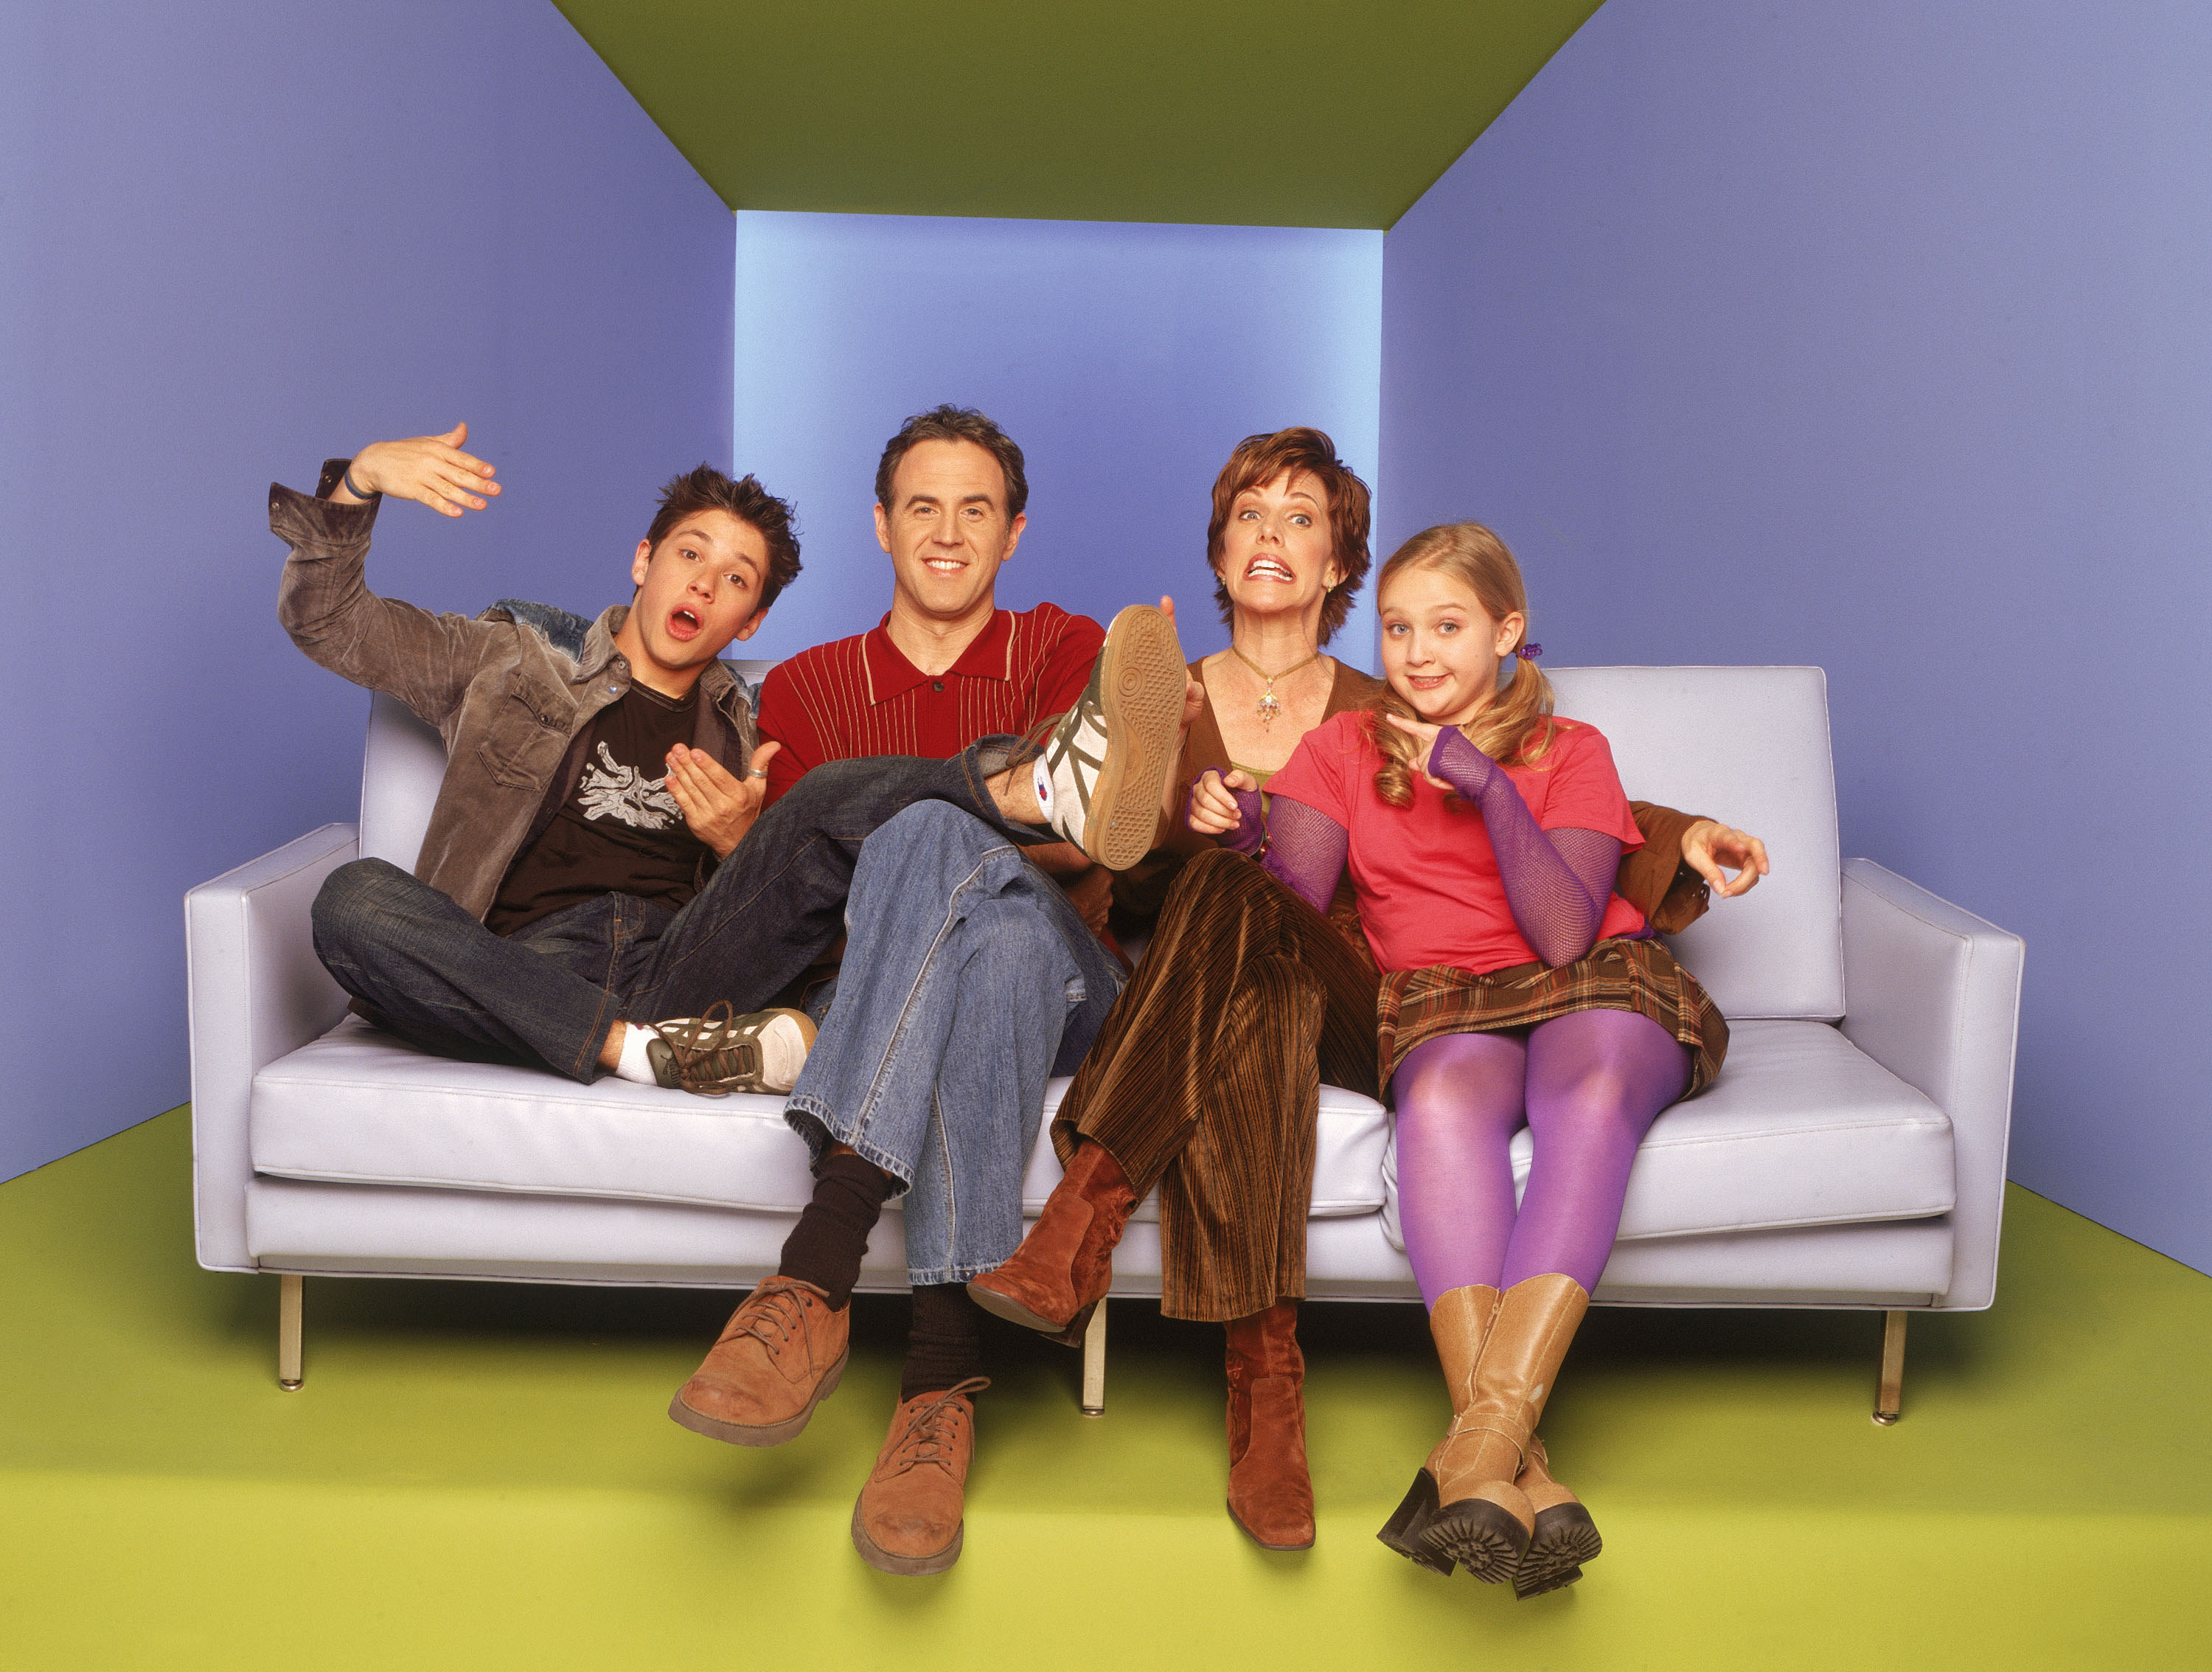 The cast of Phil of the Future sit on a couch